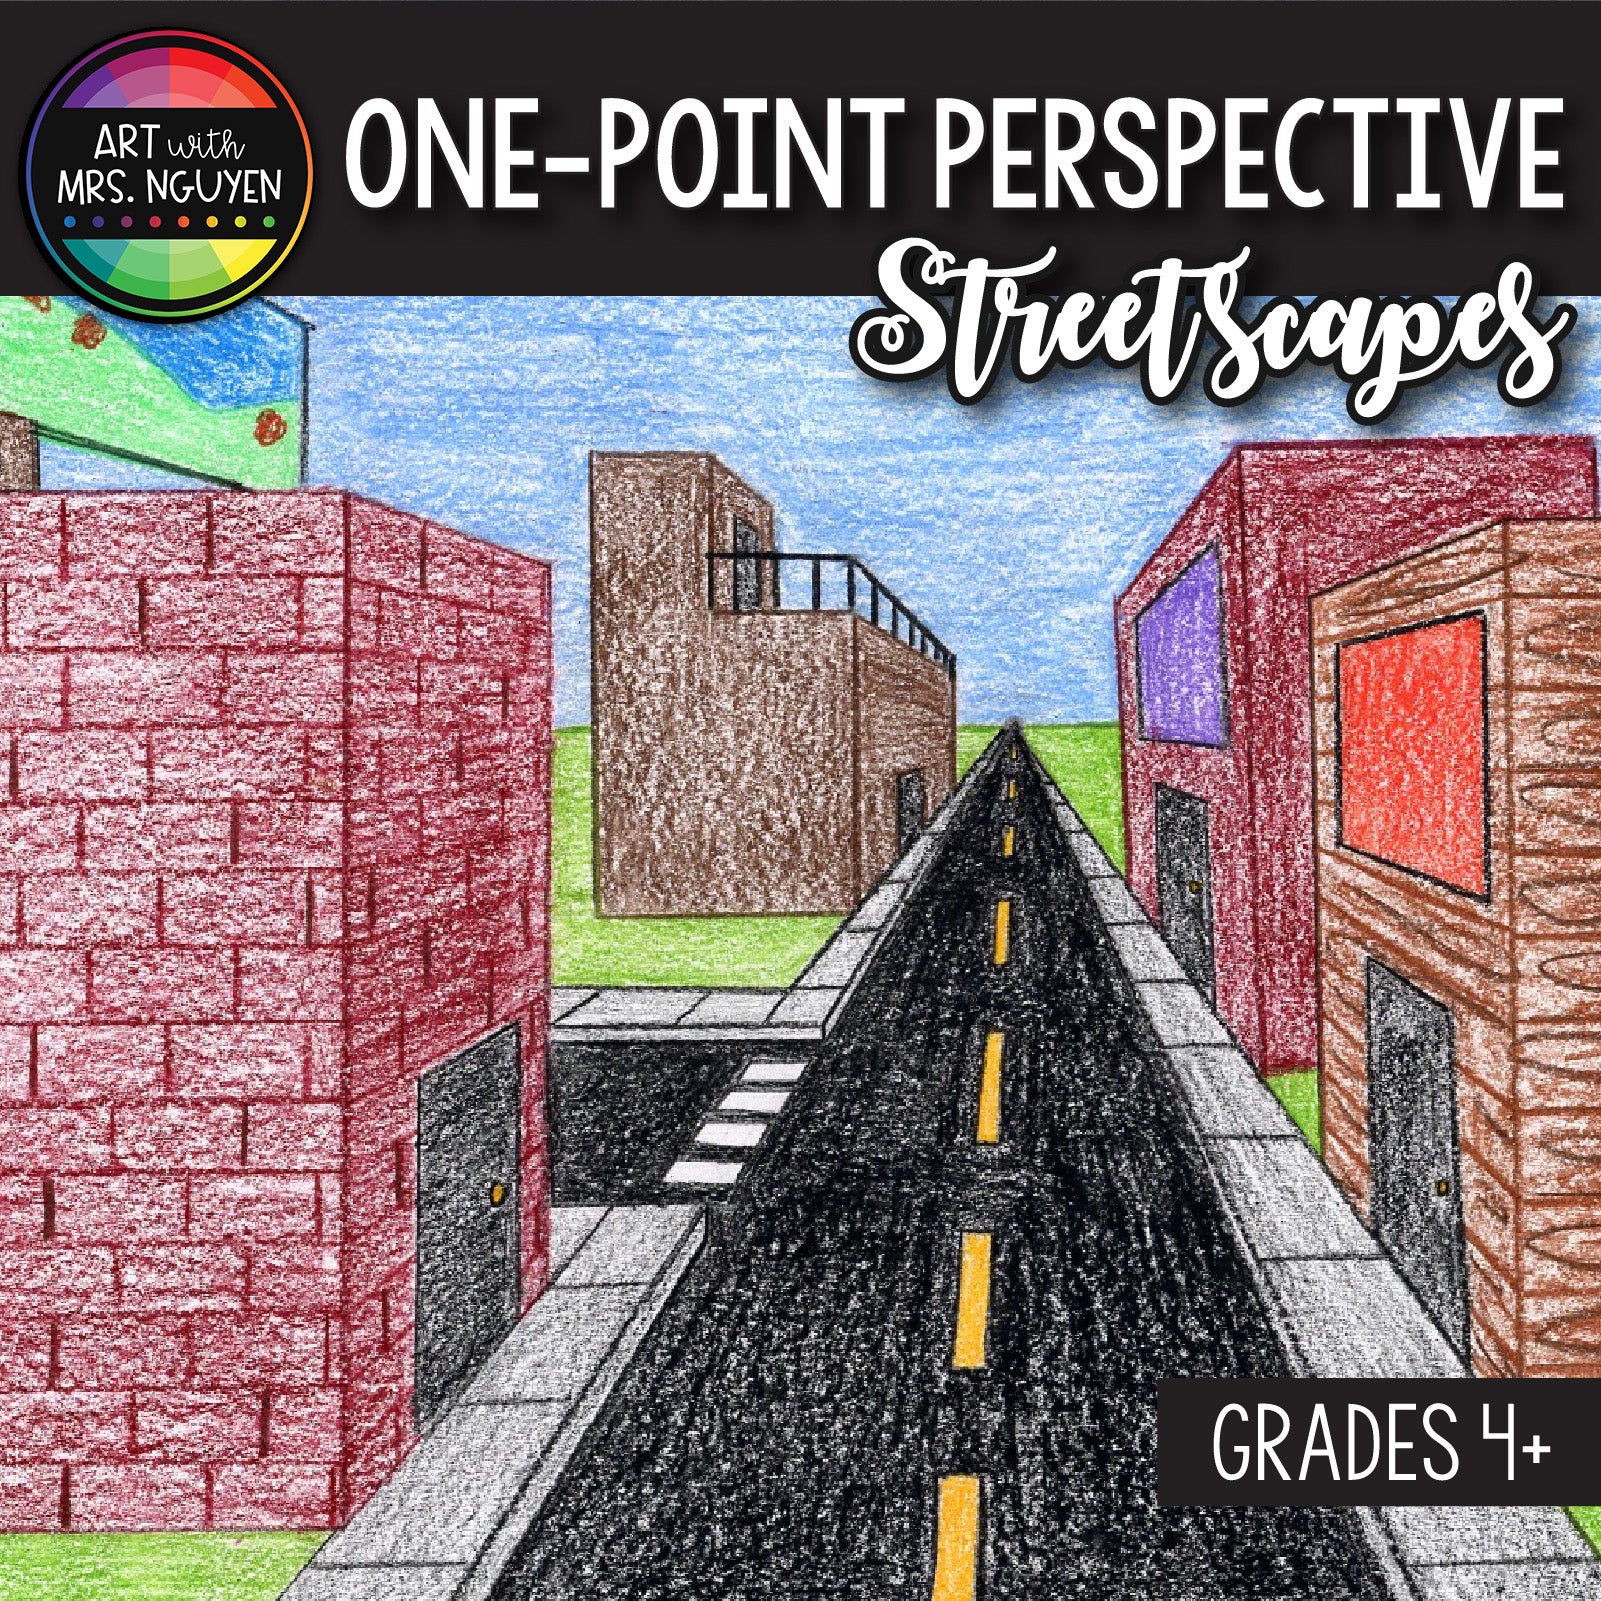 Field Notes | Streetscapes